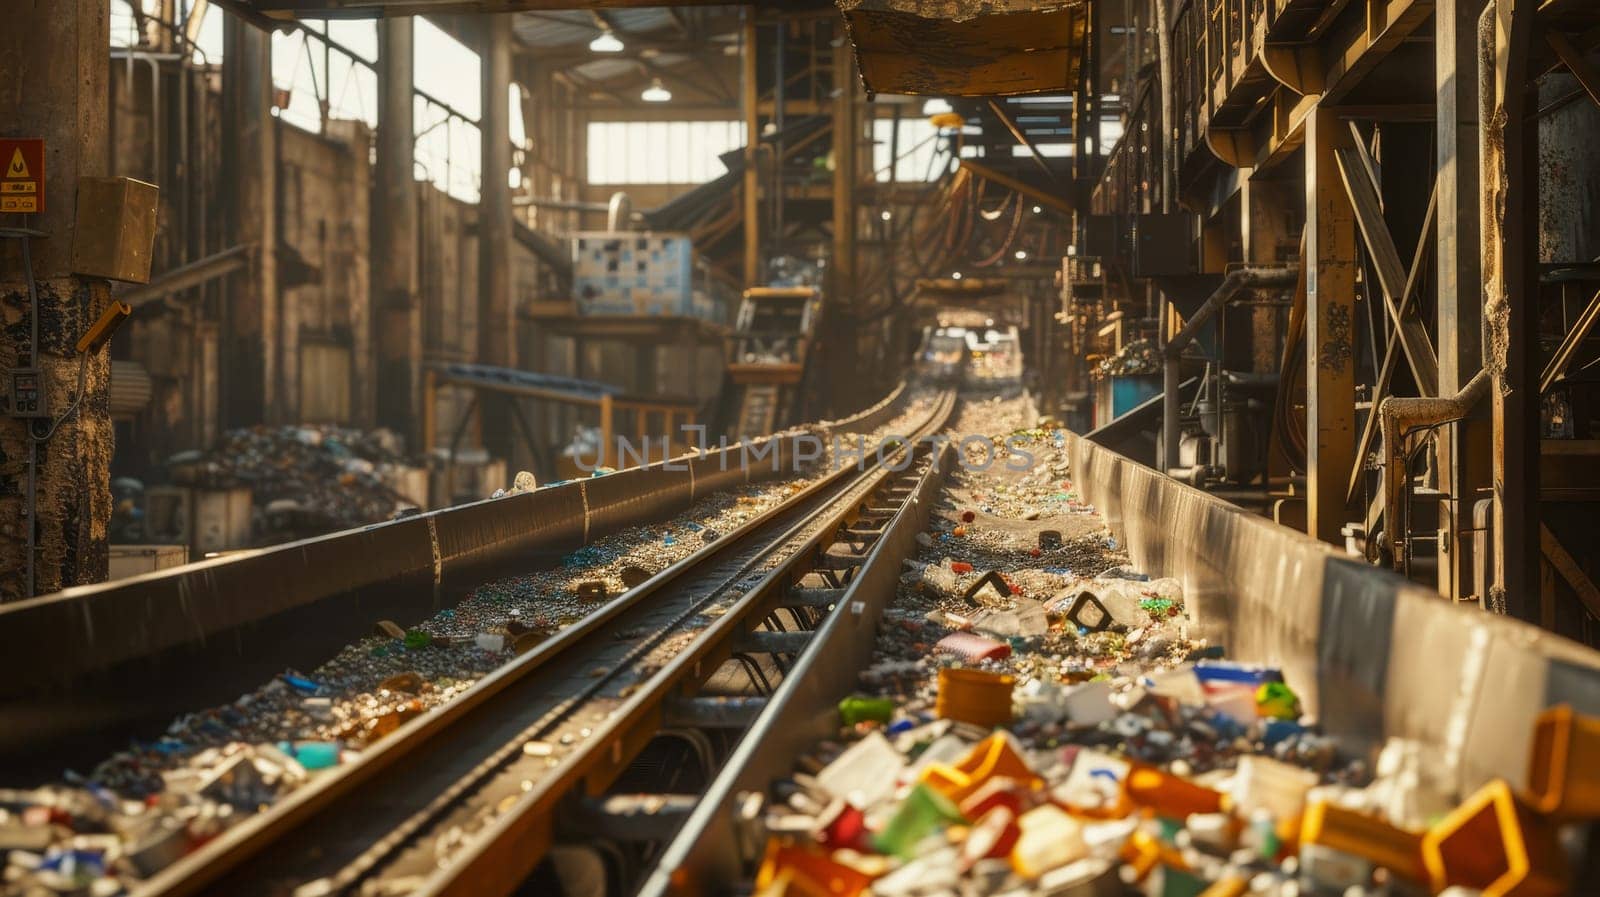 Warm sunset light casts over a recycling facility's conveyor belts laden with waste materials. by sfinks